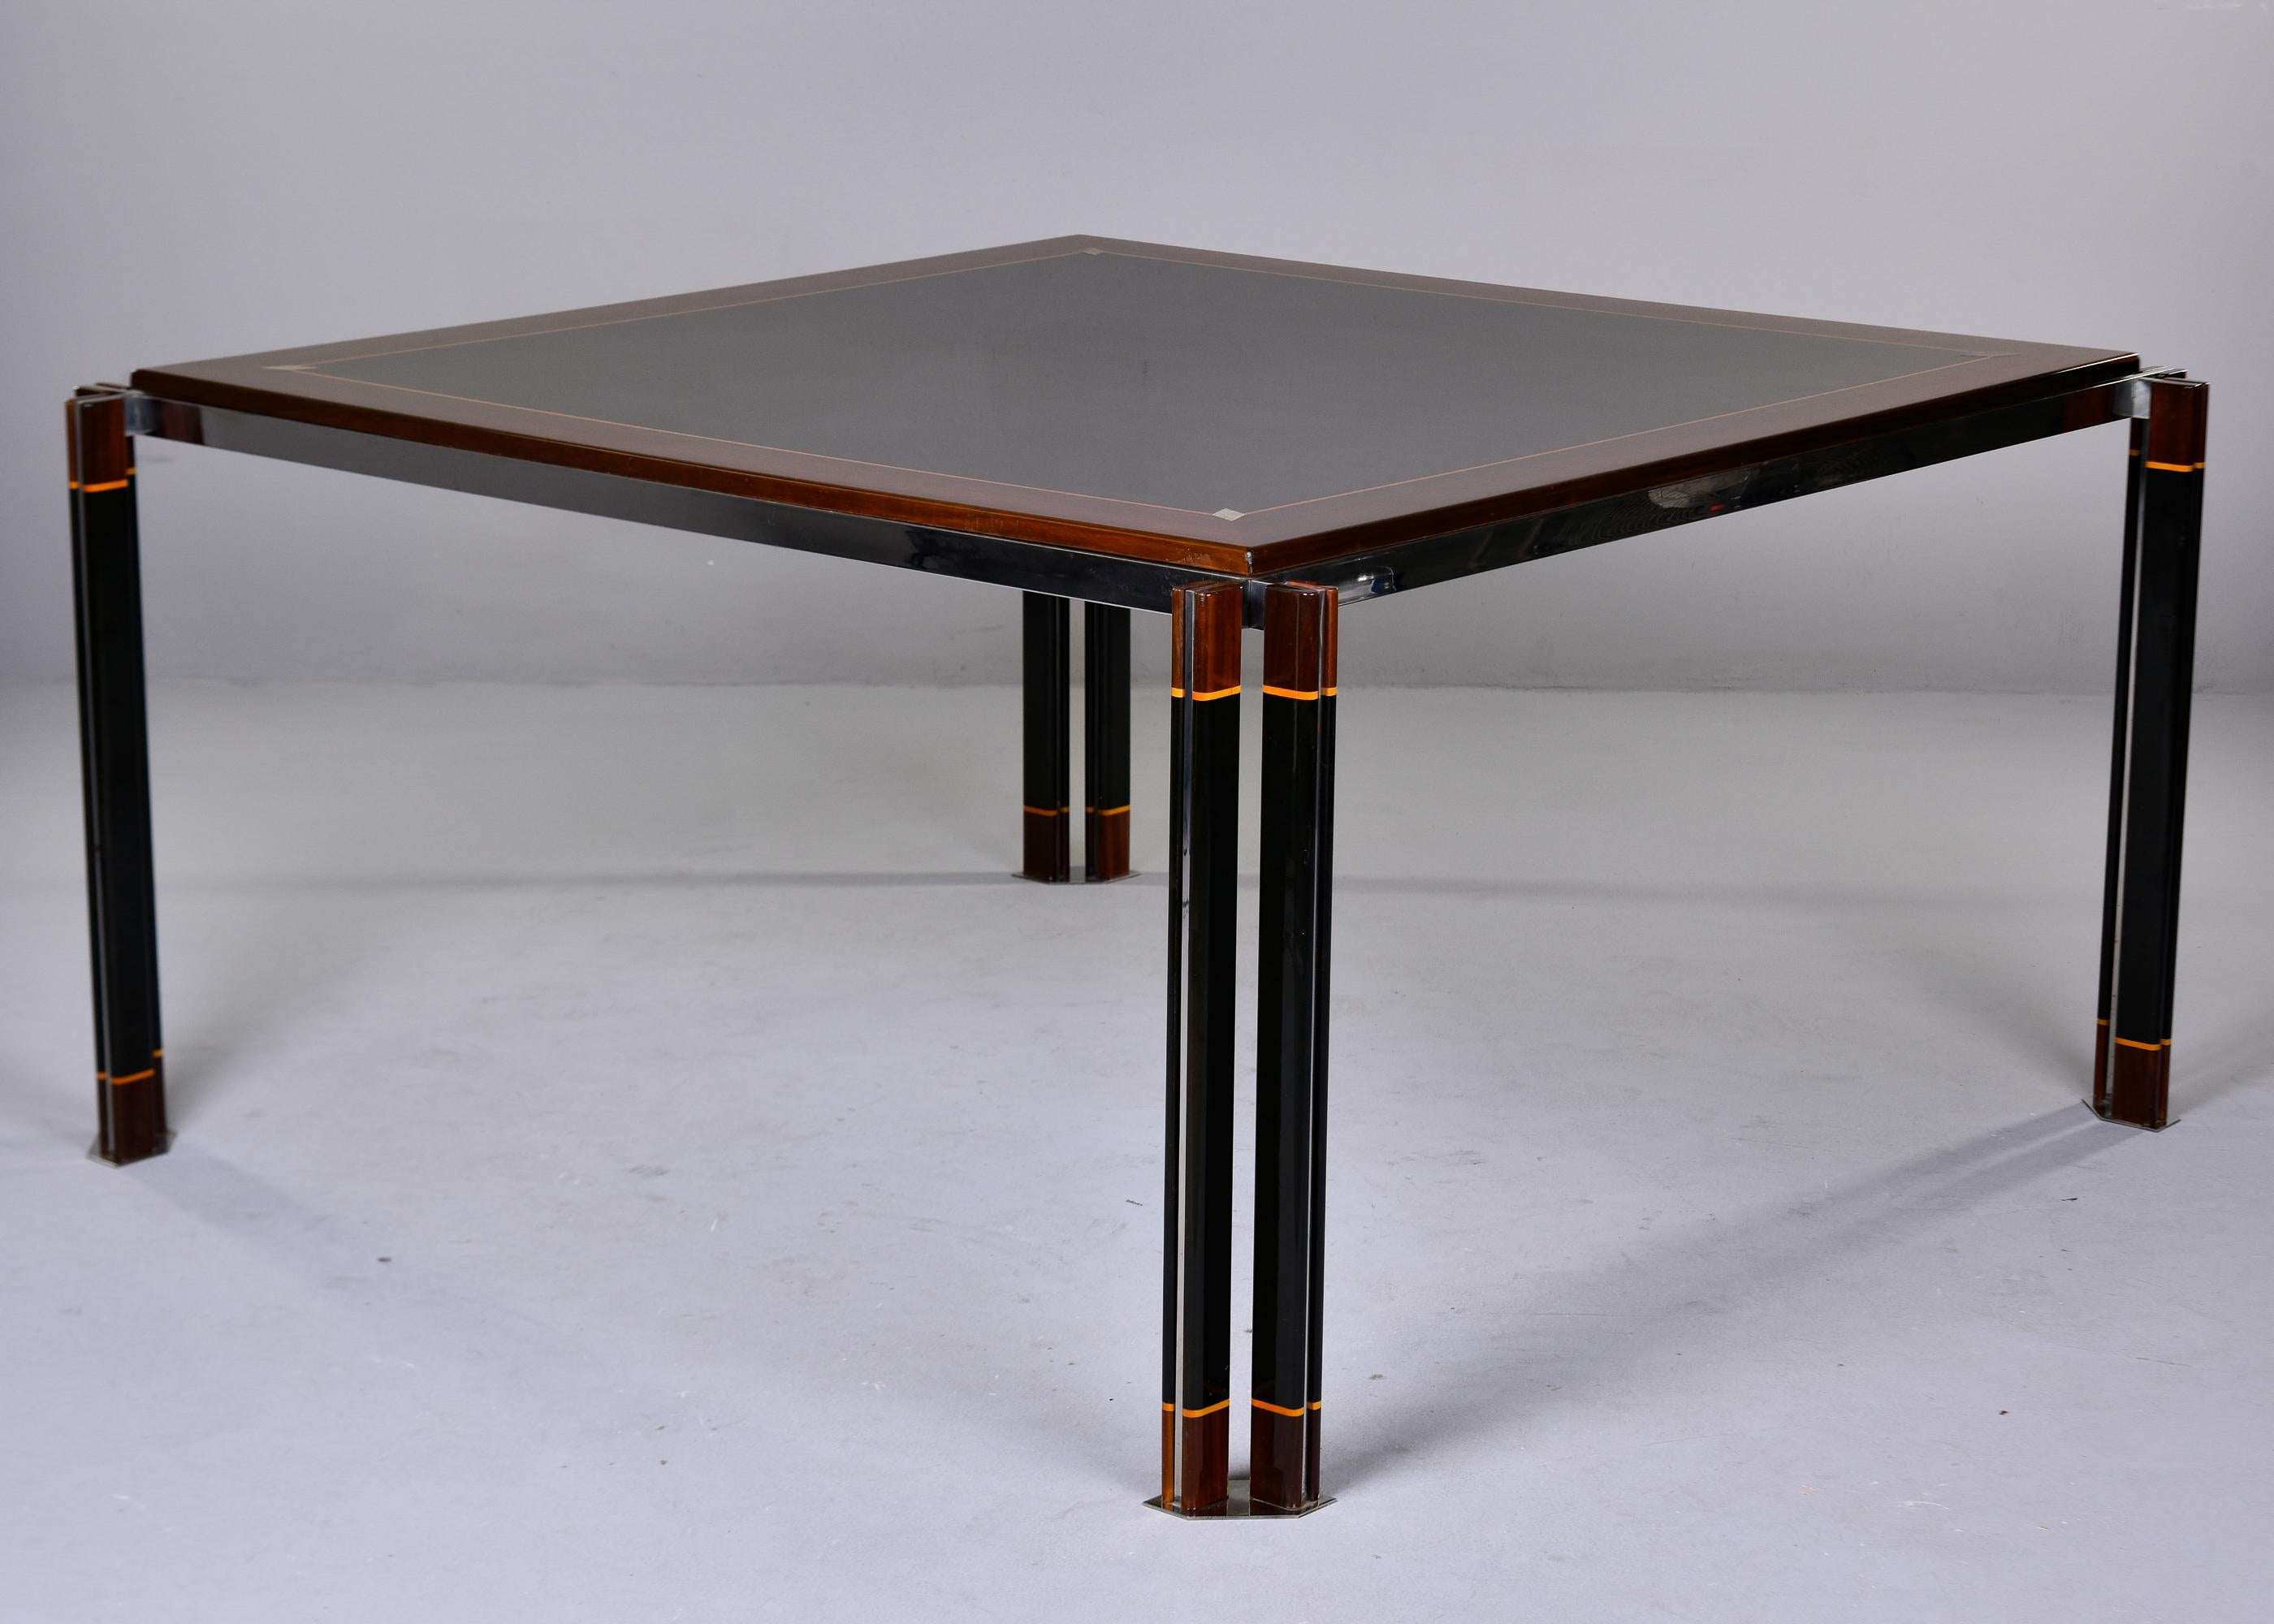 Italian Modernist Square Dining Table with Steel Detailing by Paolo Barracchia For Sale 3